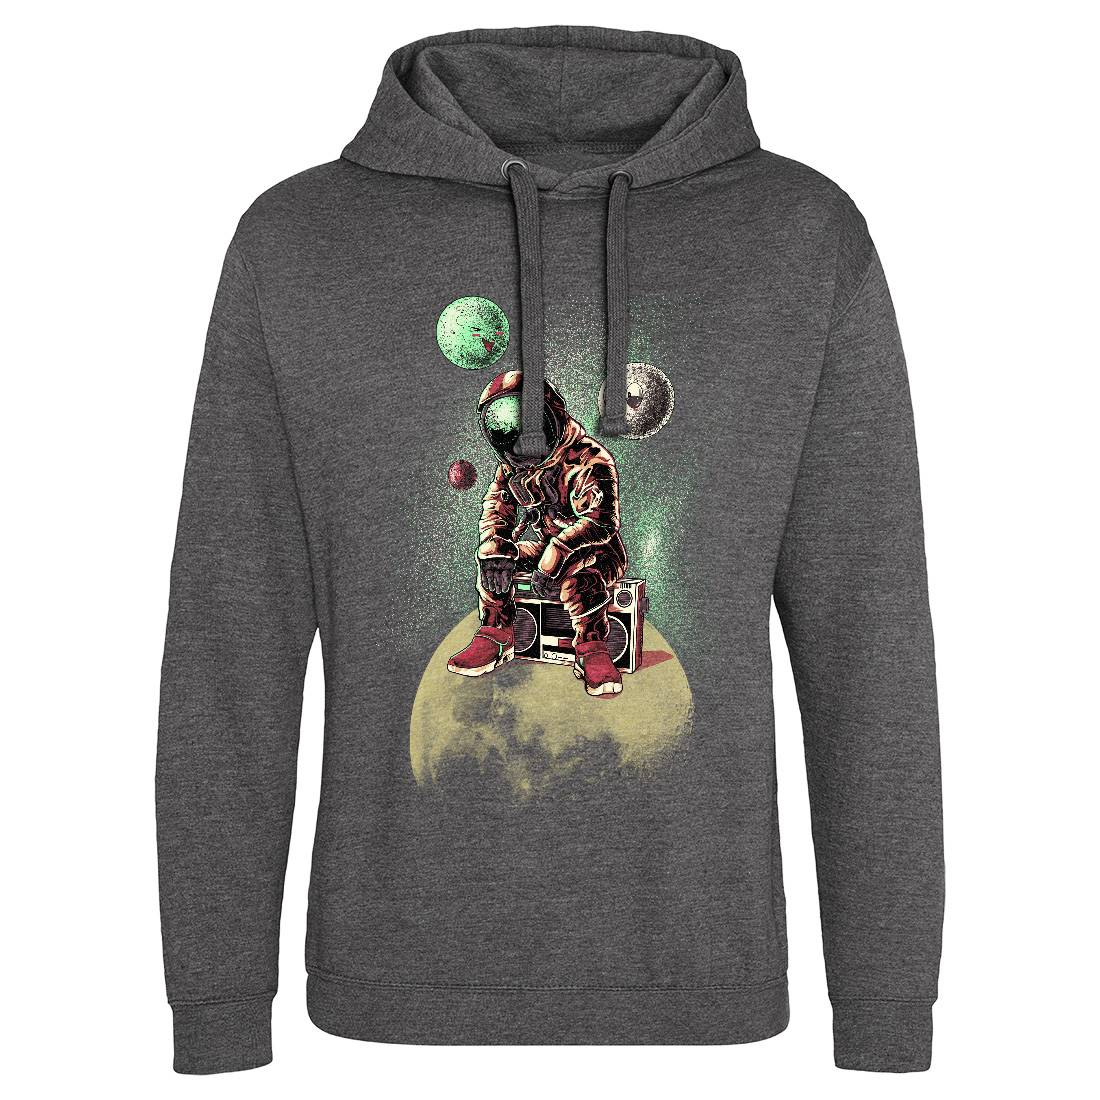 Astronaut Moon Mens Hoodie Without Pocket Space B986